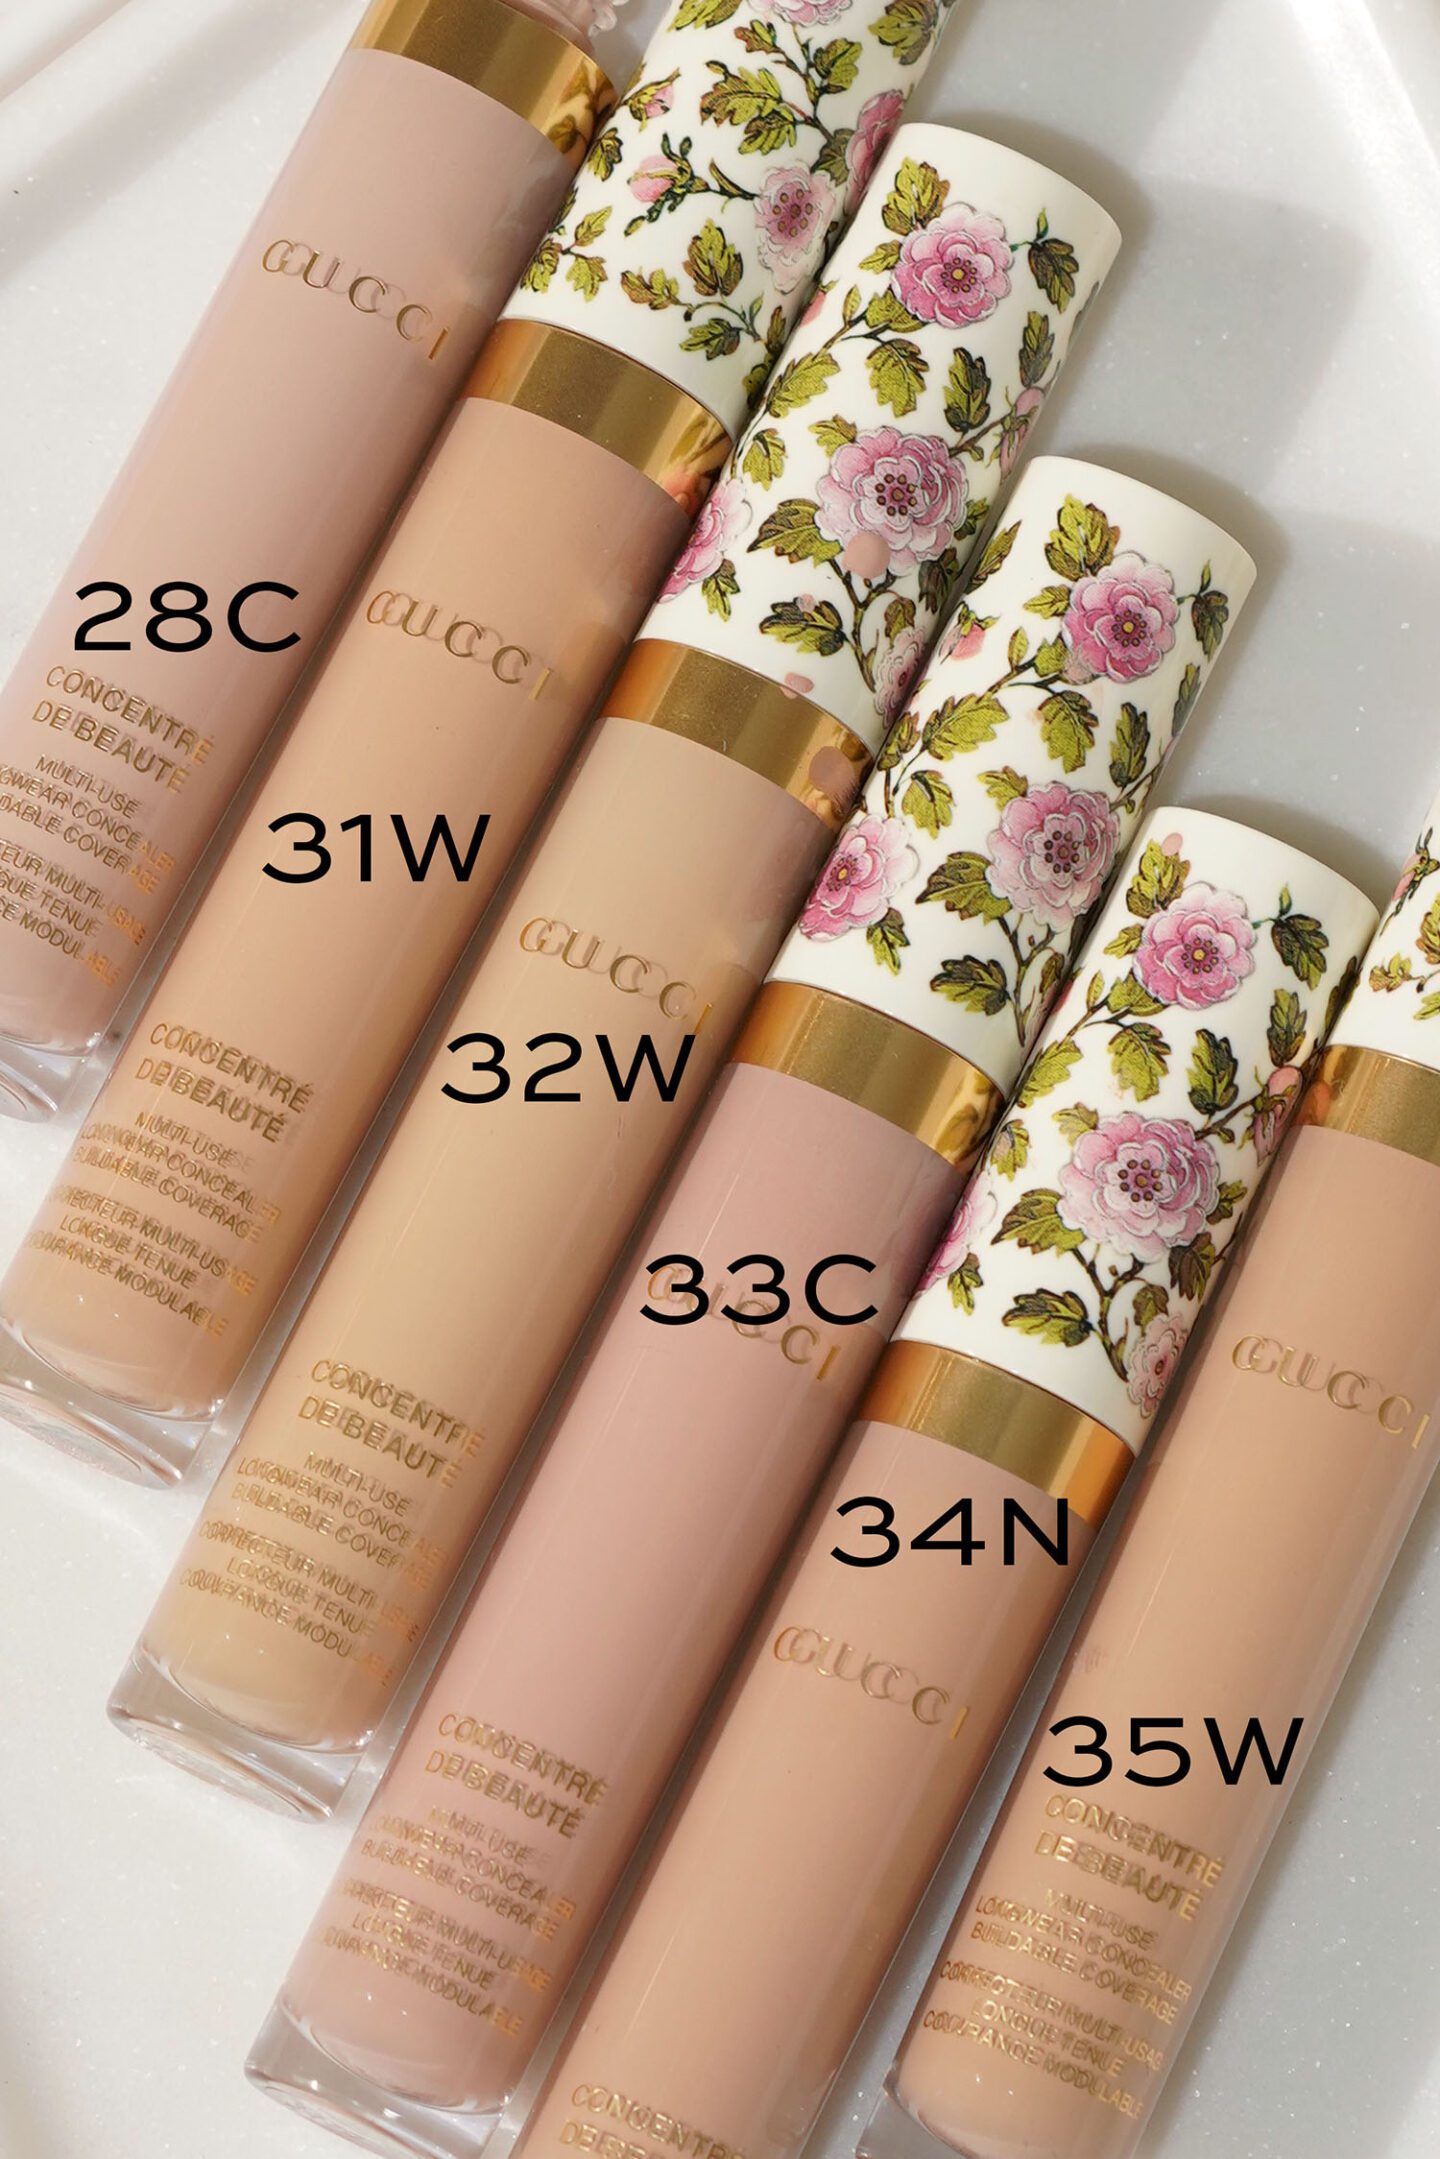 Gucci Beauty Multi-Use Long Wear Concealer review 28C to 35W